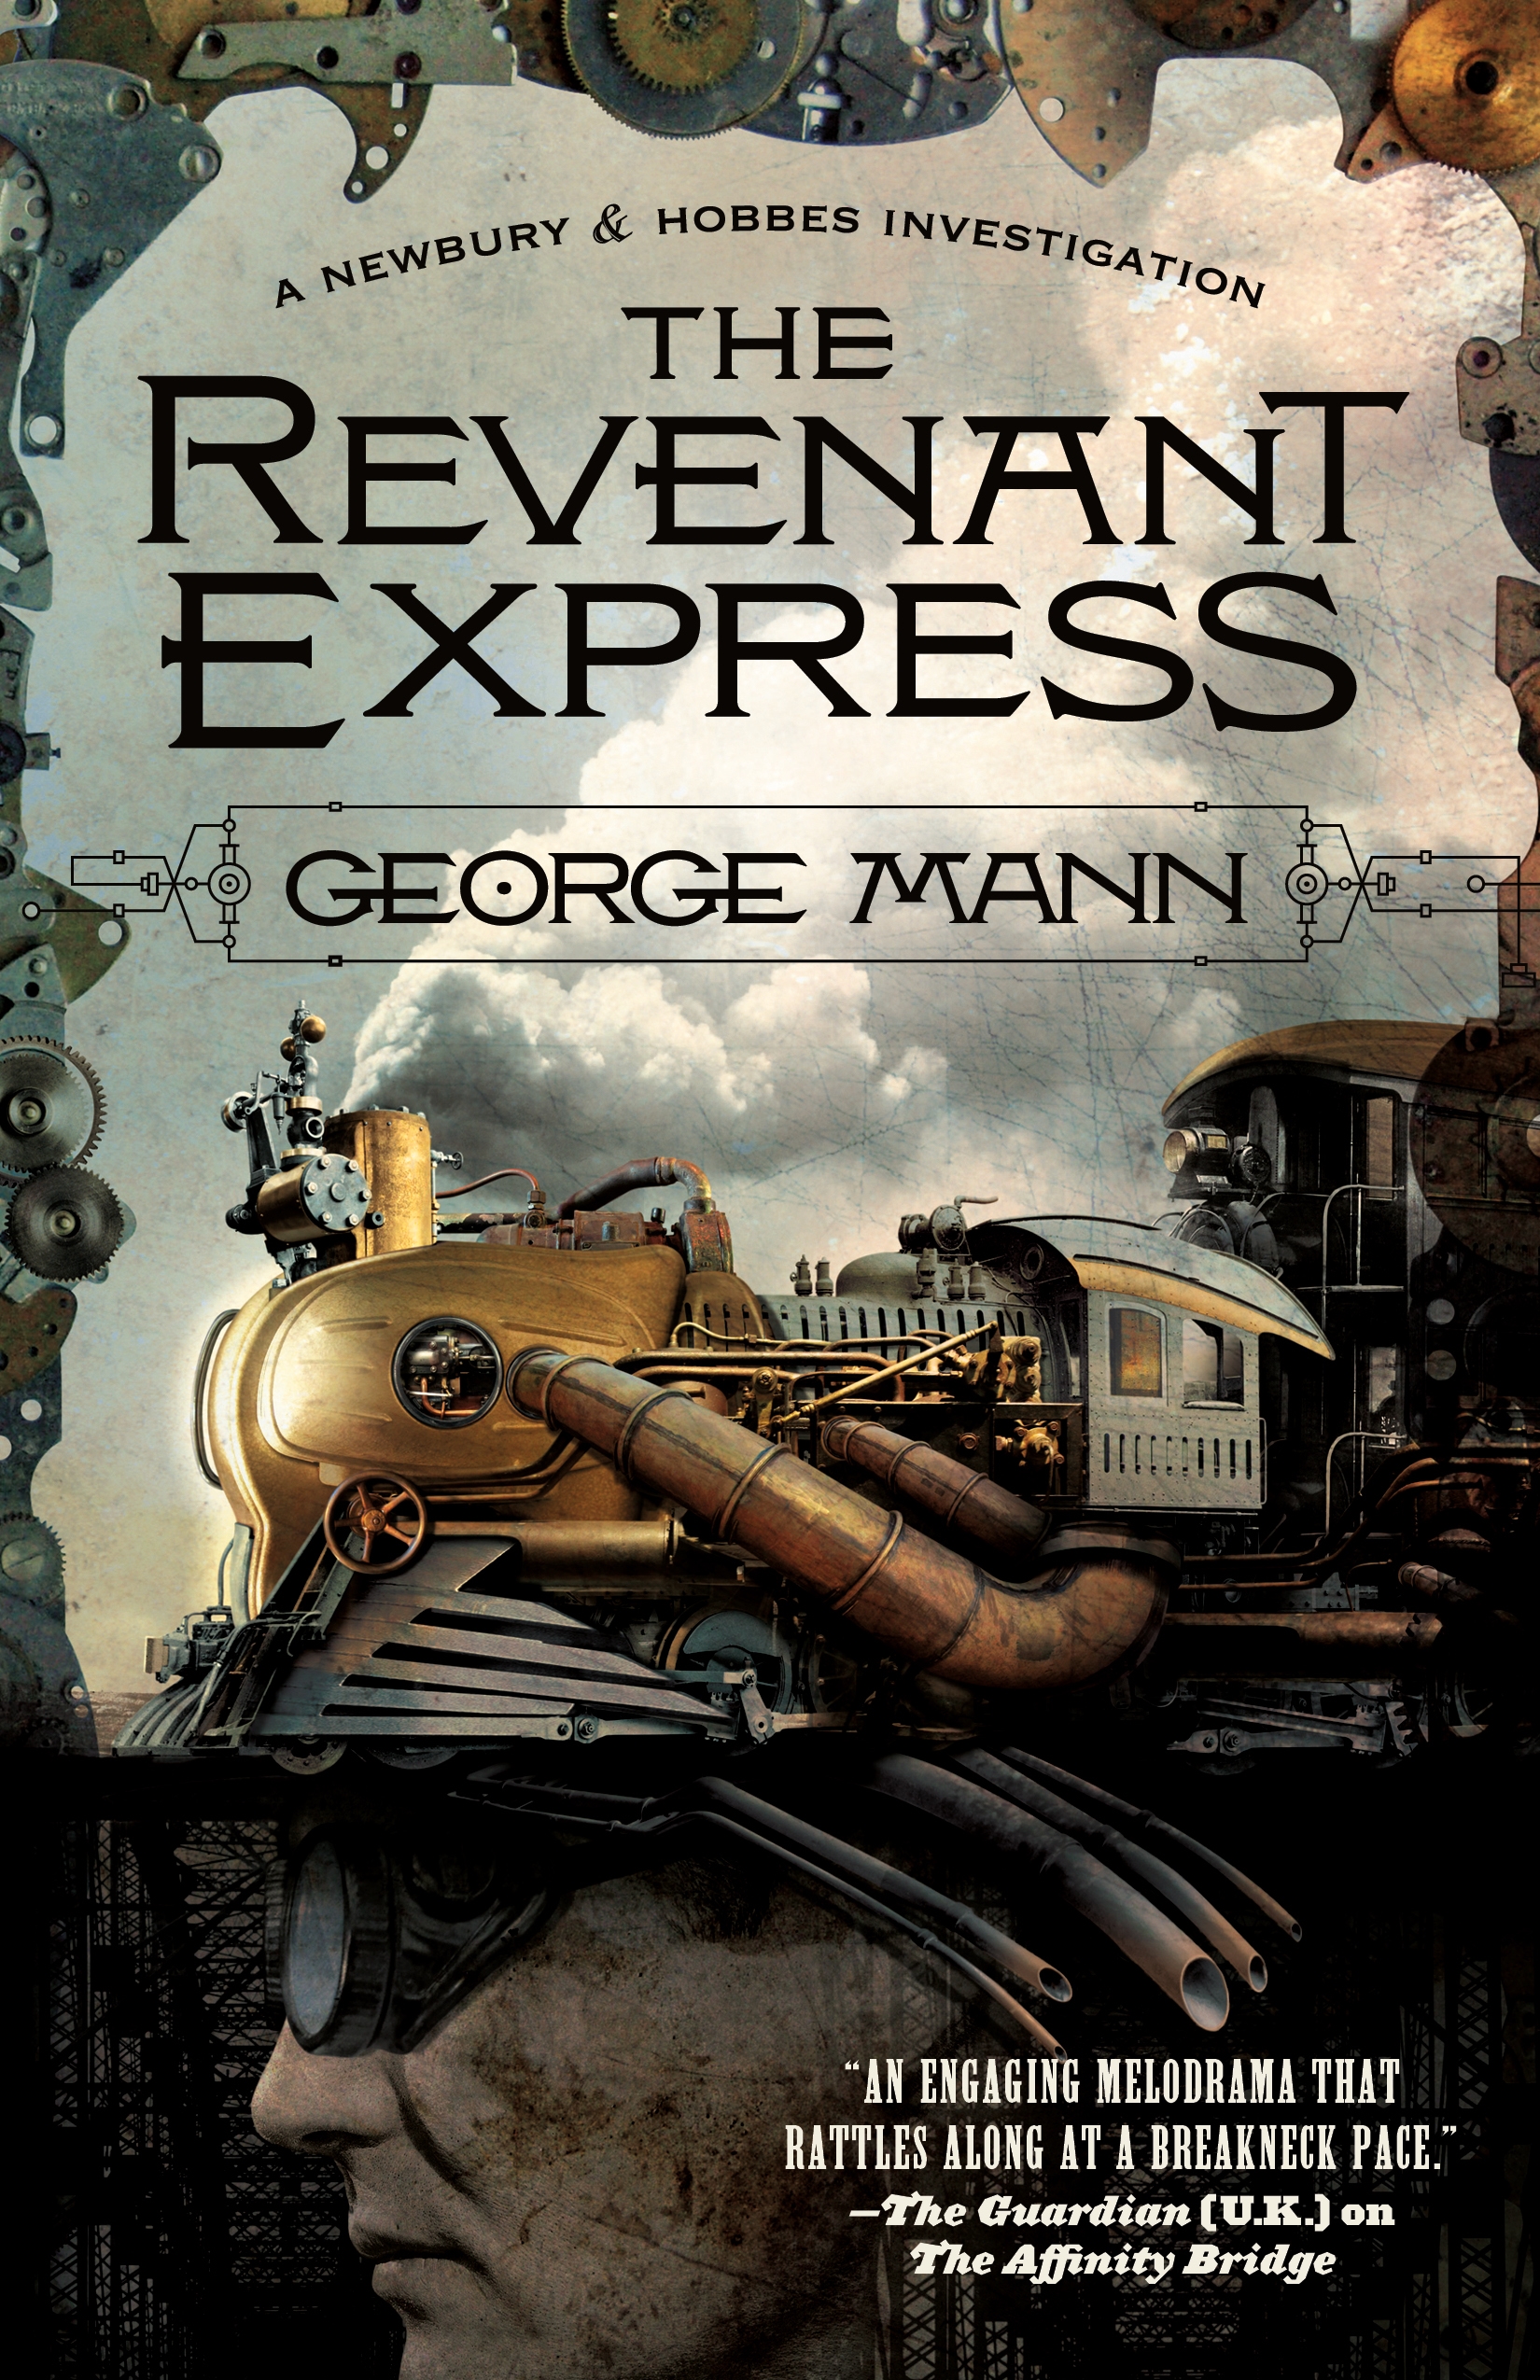 The Revenant Express : A Newbury & Hobbes Investigation by George Mann